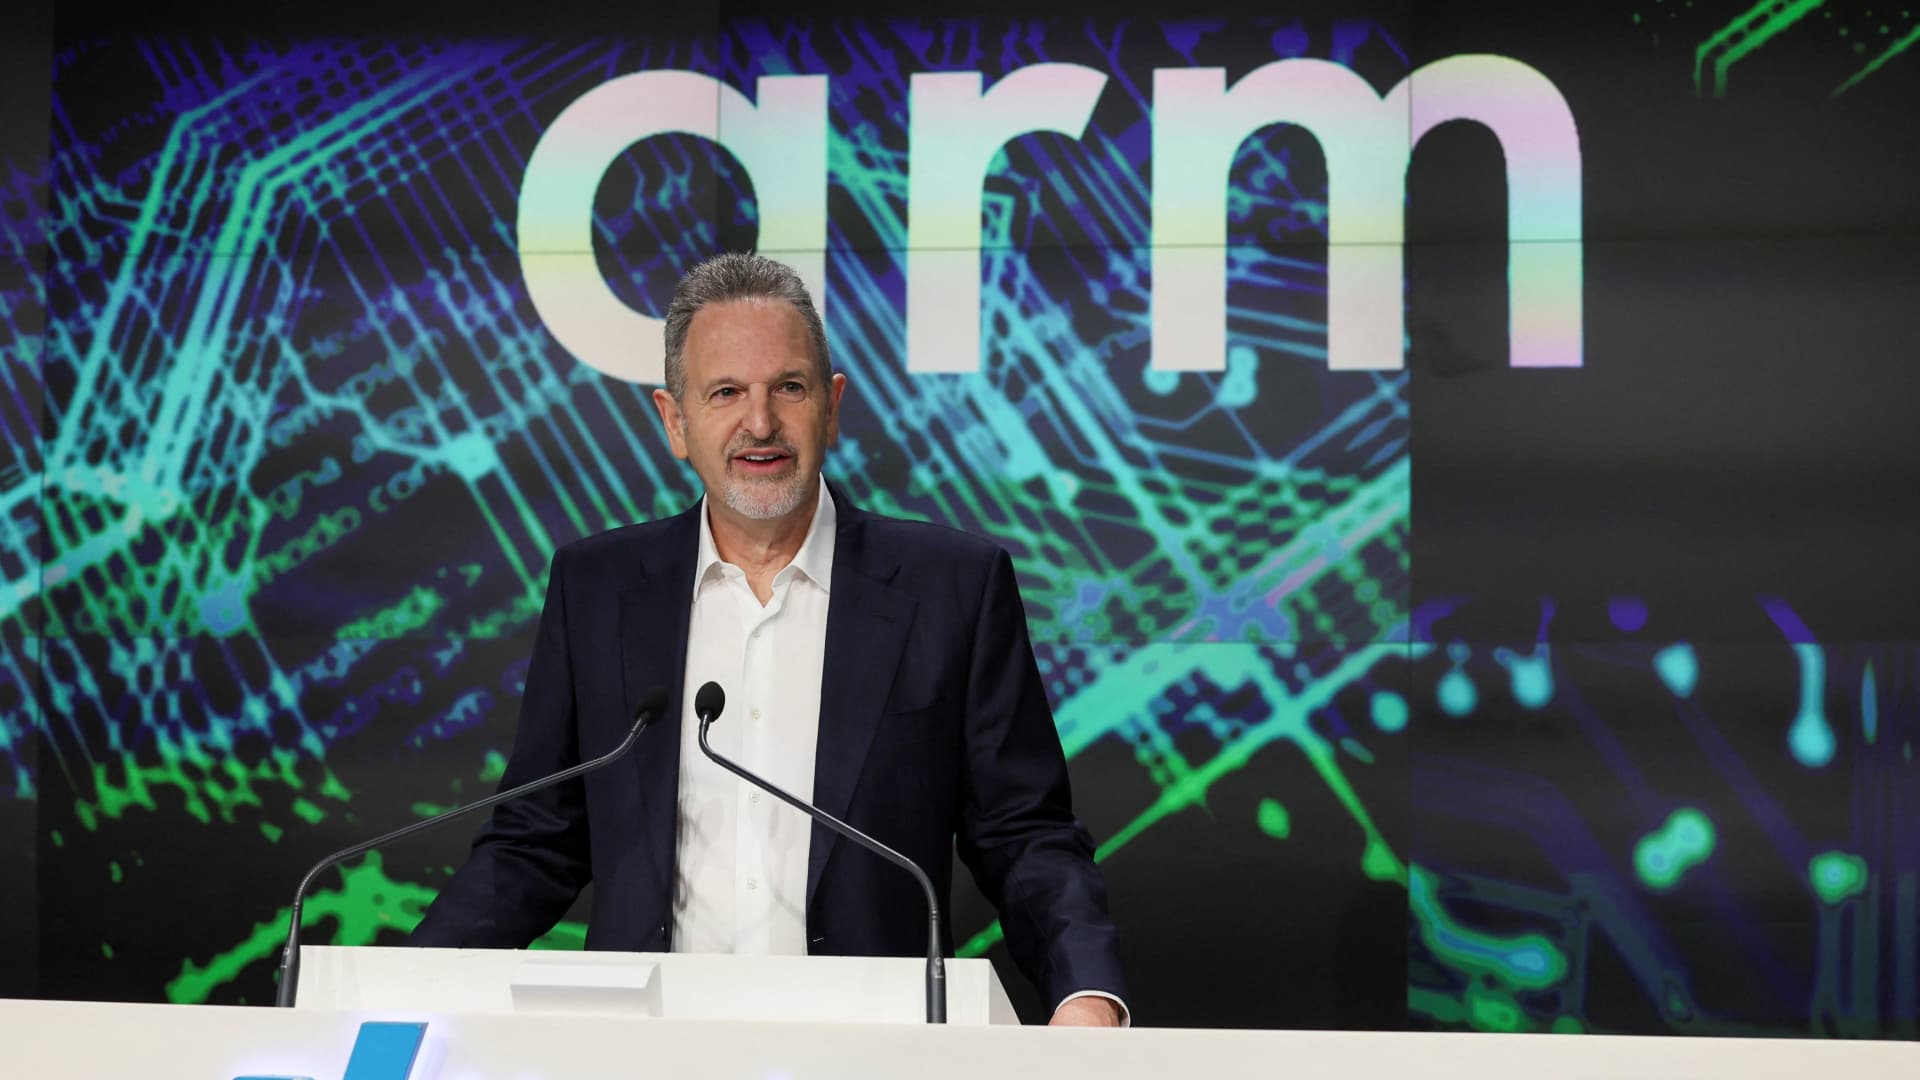 Arm beats sales expectations in first post-IPO earnings report, but guidance falls short